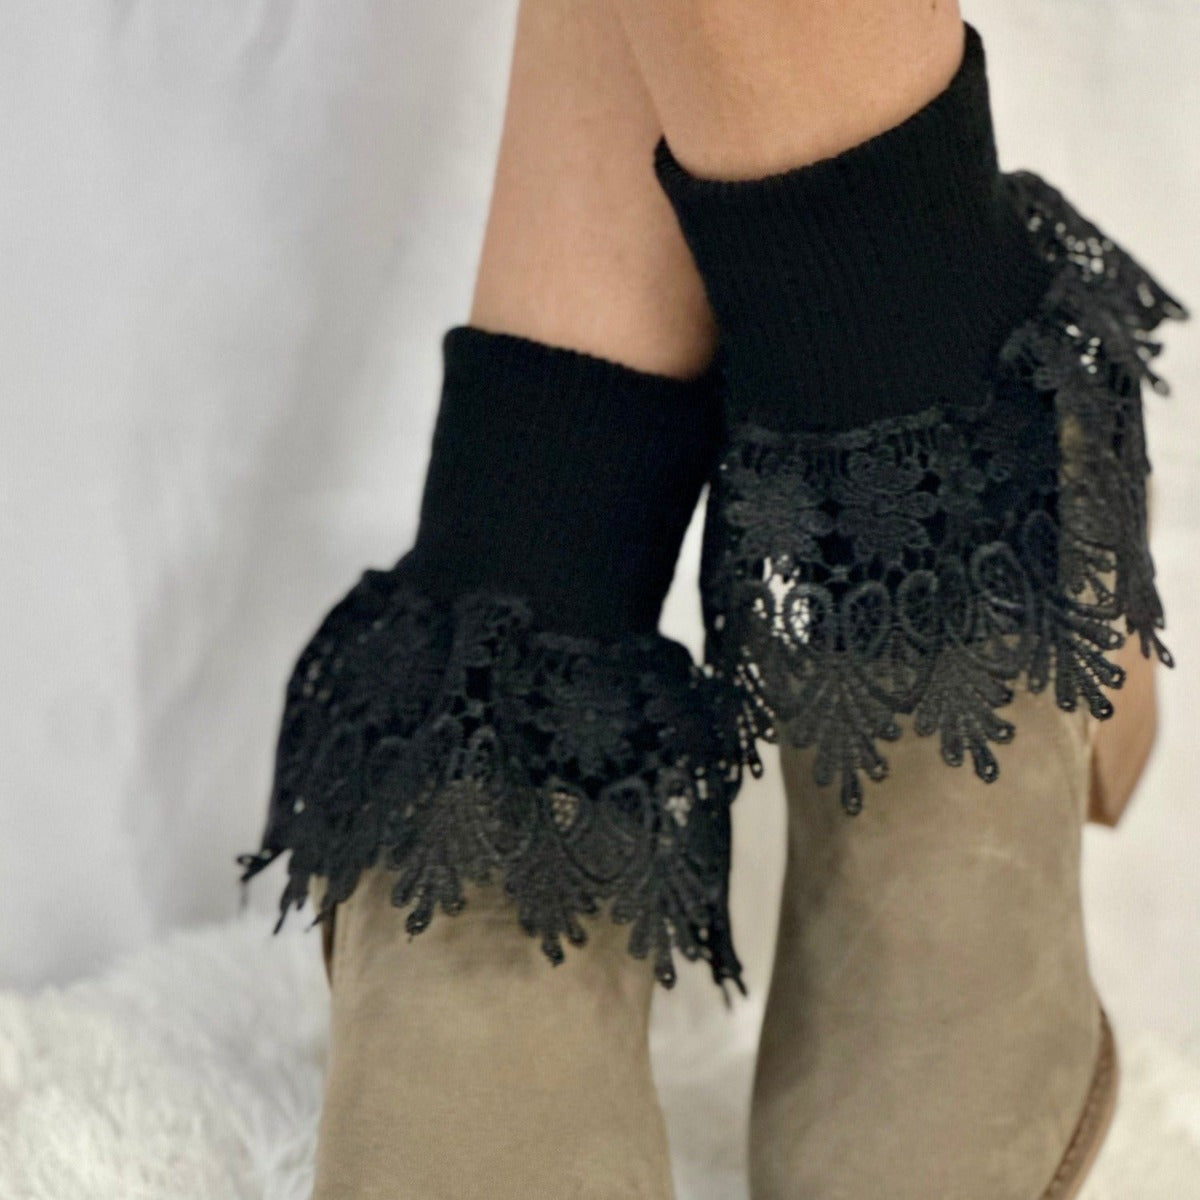 SIGNATURE lace ankle cuff socks women - black, lace socks for boots best 